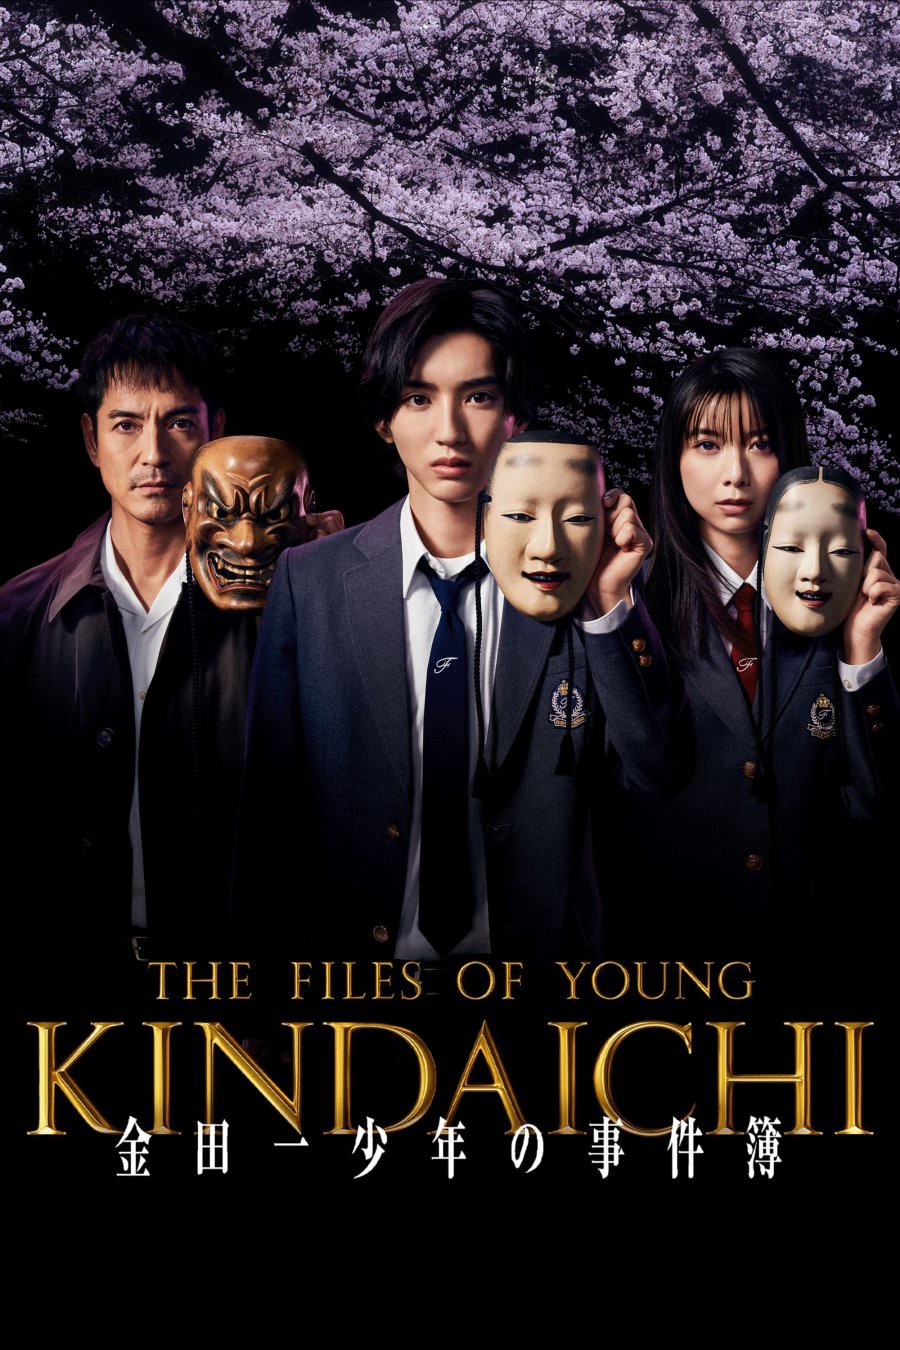 The Files of Young Kindaichi 5 - The Files of Young Kindaichi 5